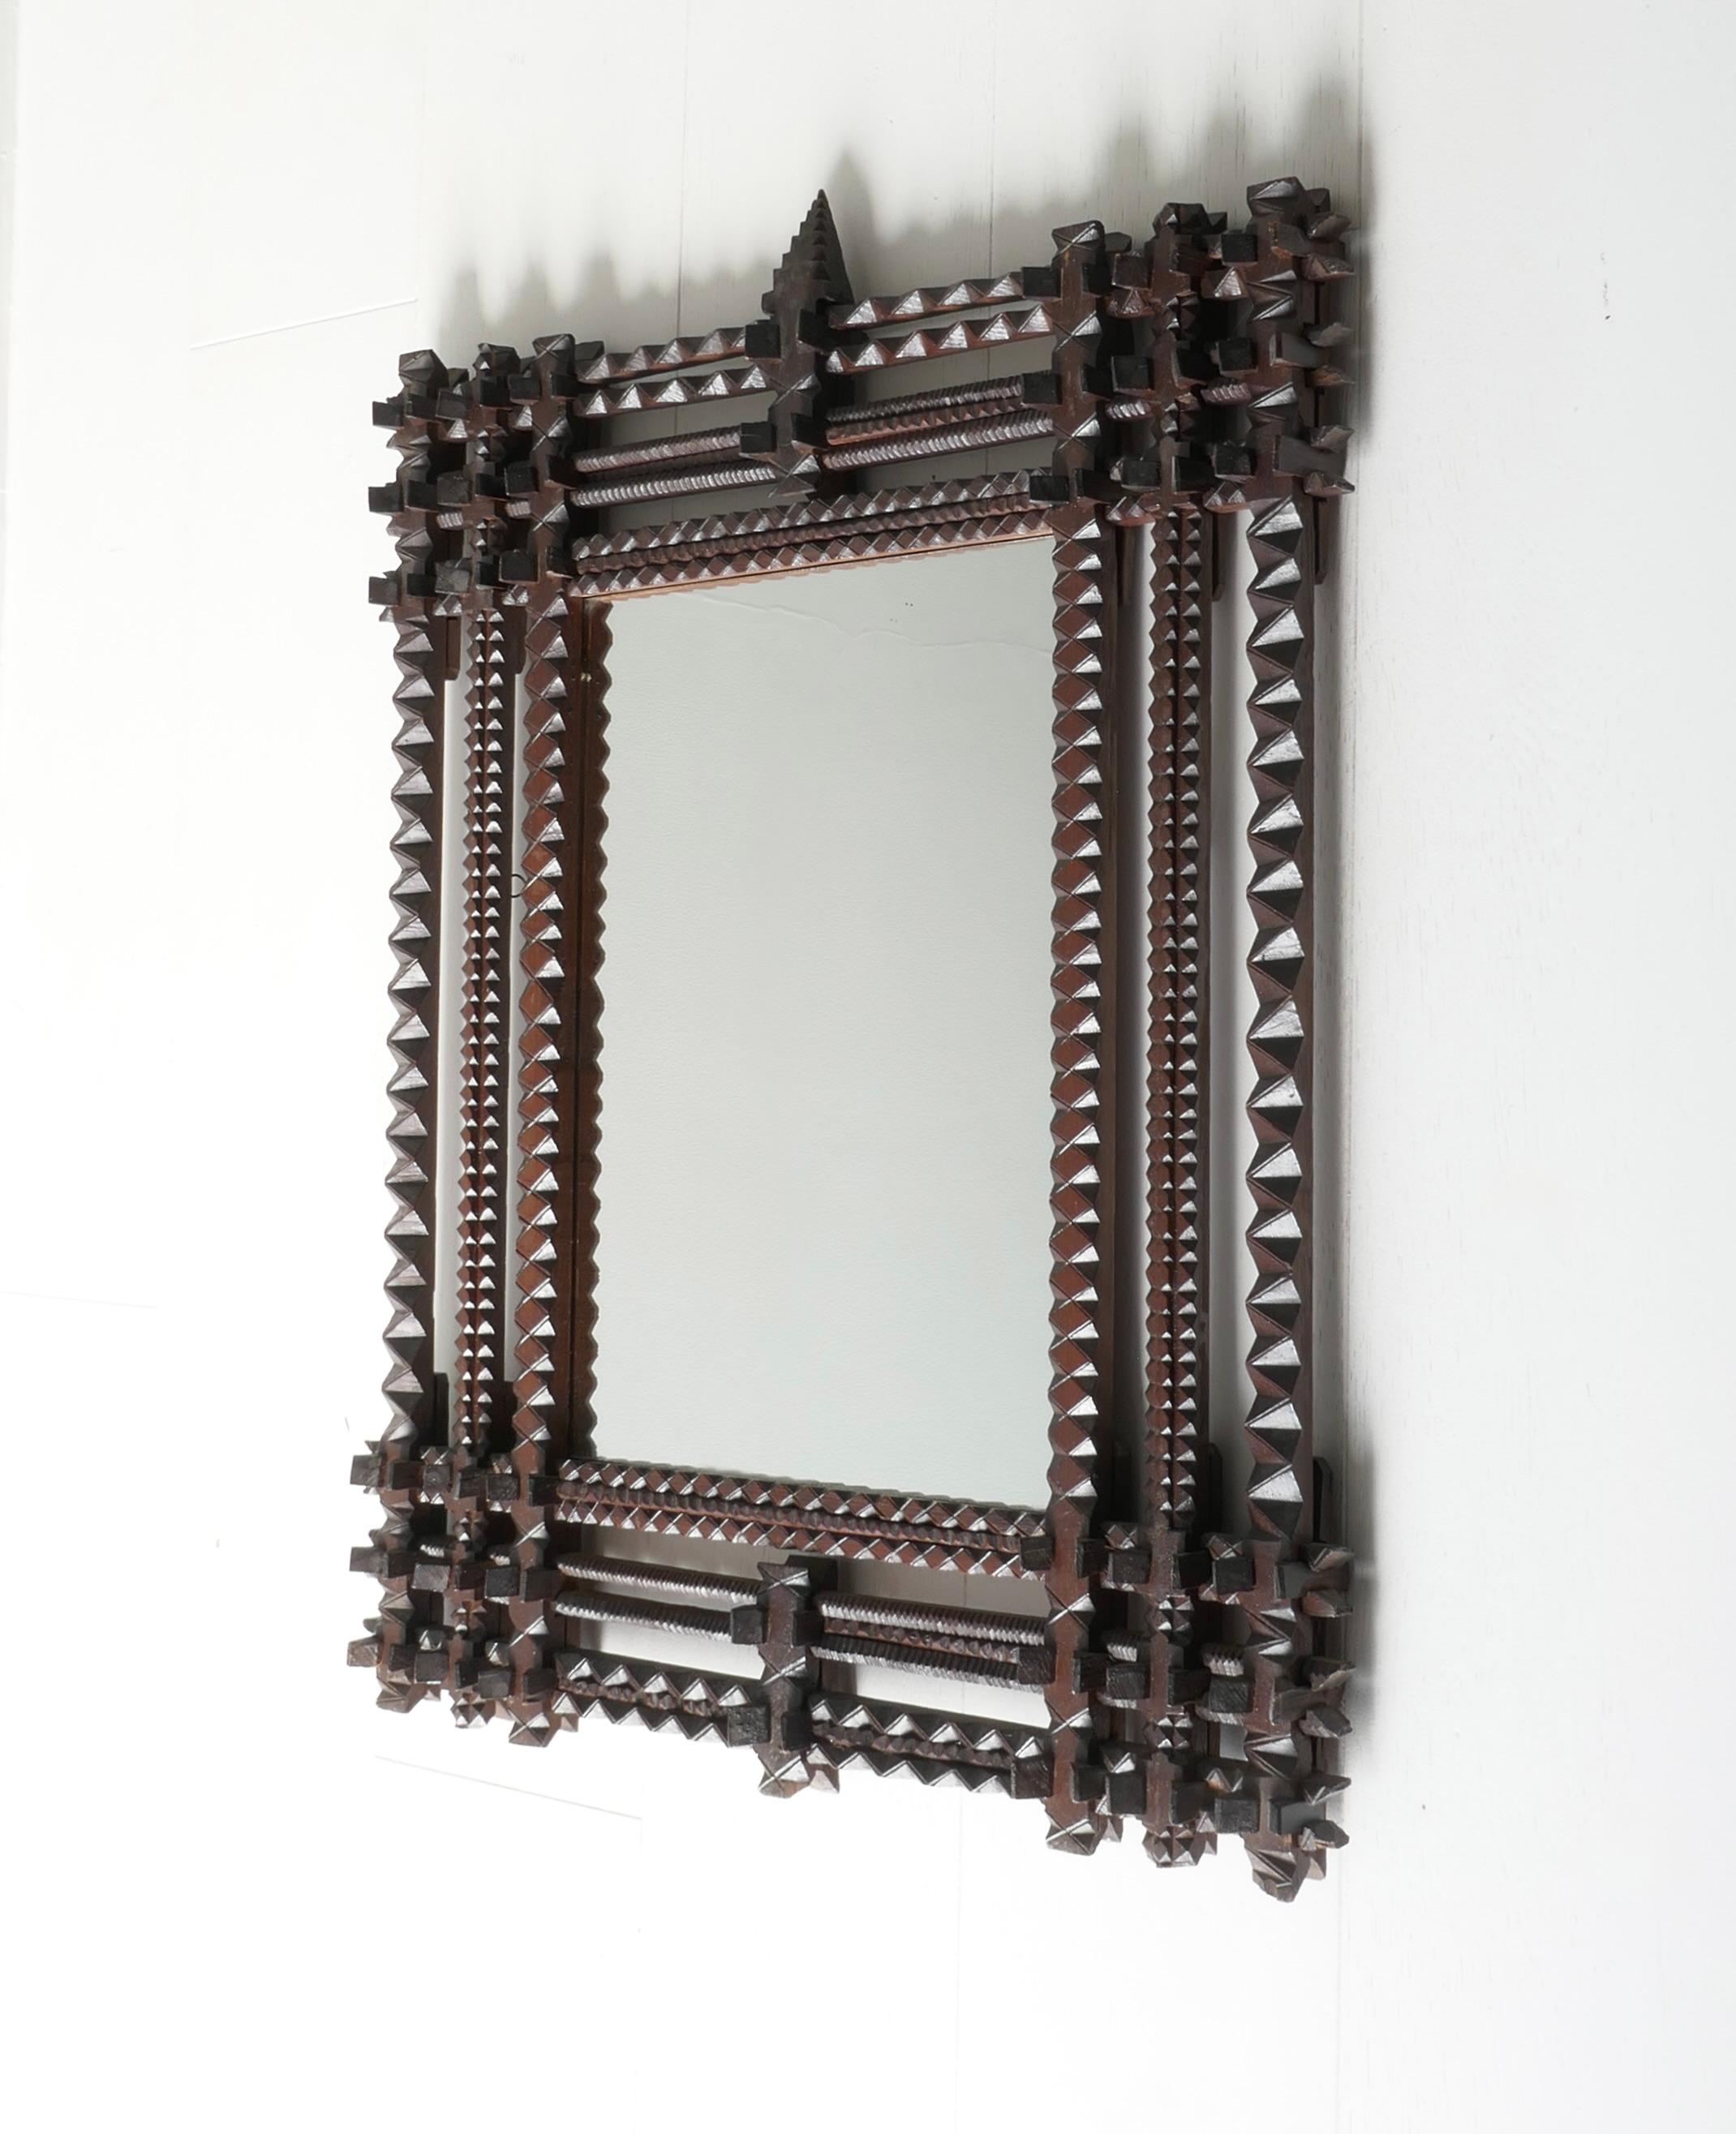 It is very rare to find a pair of these frames of this large size, quality and complexity. The pieces have been hand carved and assembled like a 3-dimensional puzzle. The pitch pine frames with dark patina date from circa 1880. They were originally